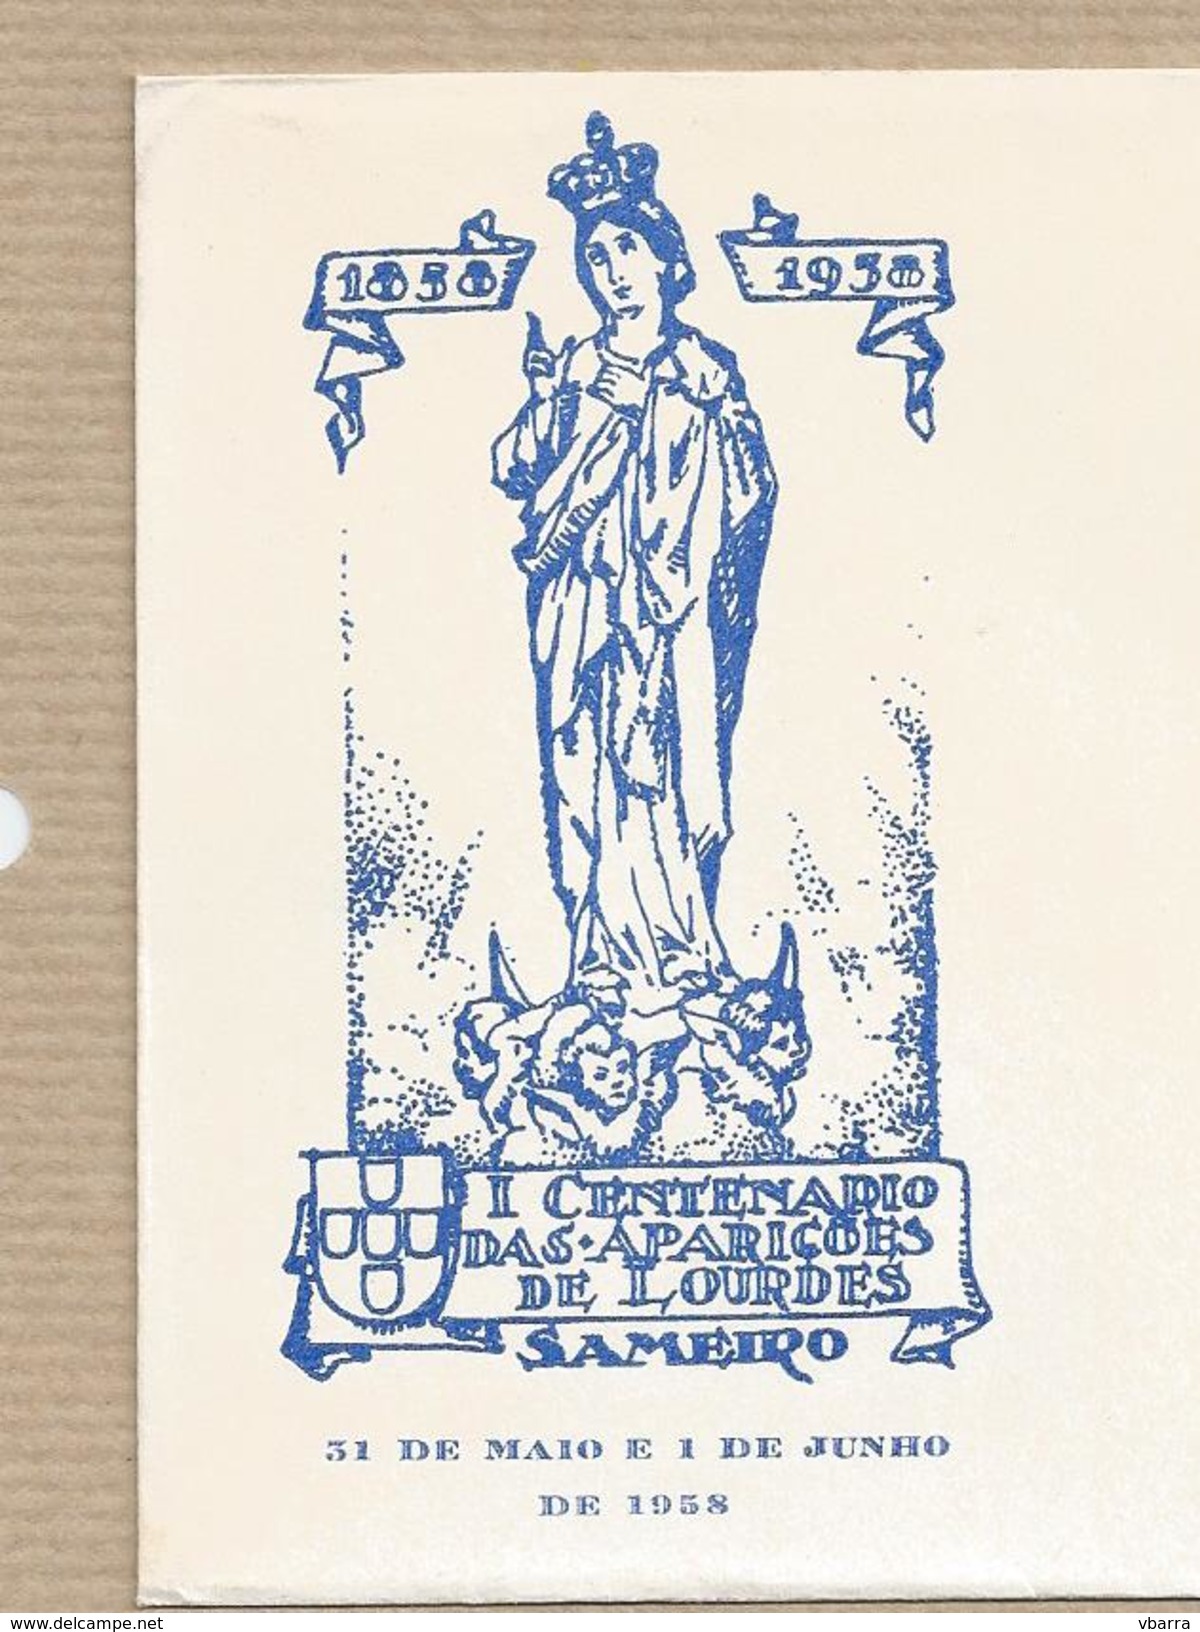 Portugal FDC First Day Cover Sobrescrito 1º Dia Centenary Of The Apparitions Of Lourdes. N S. Sameiro Portugal May 1968 - FDC